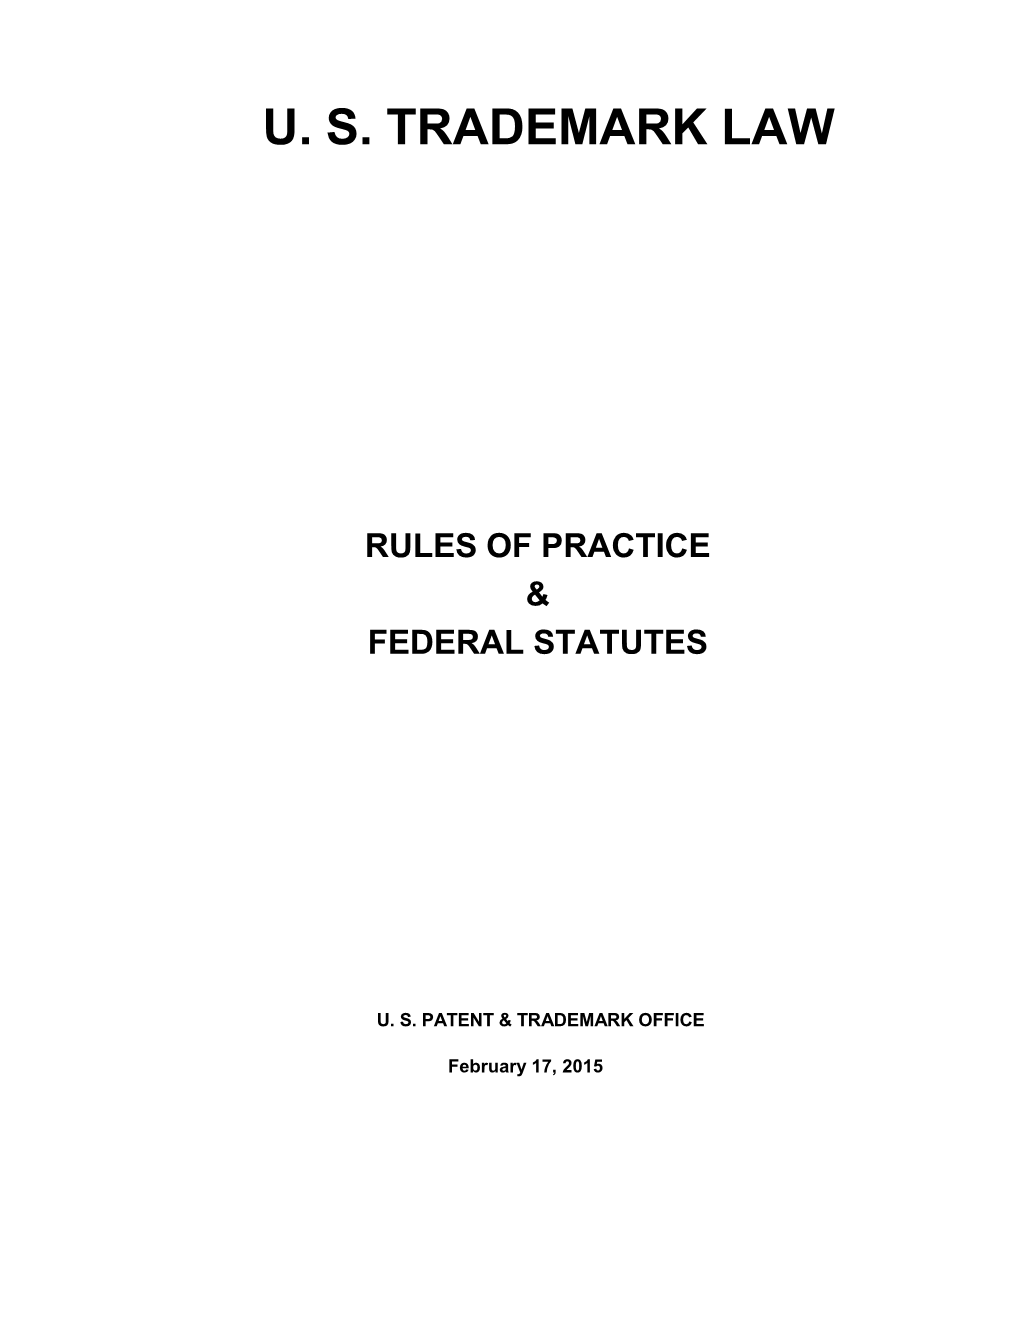 Trademark Rules and Statutes